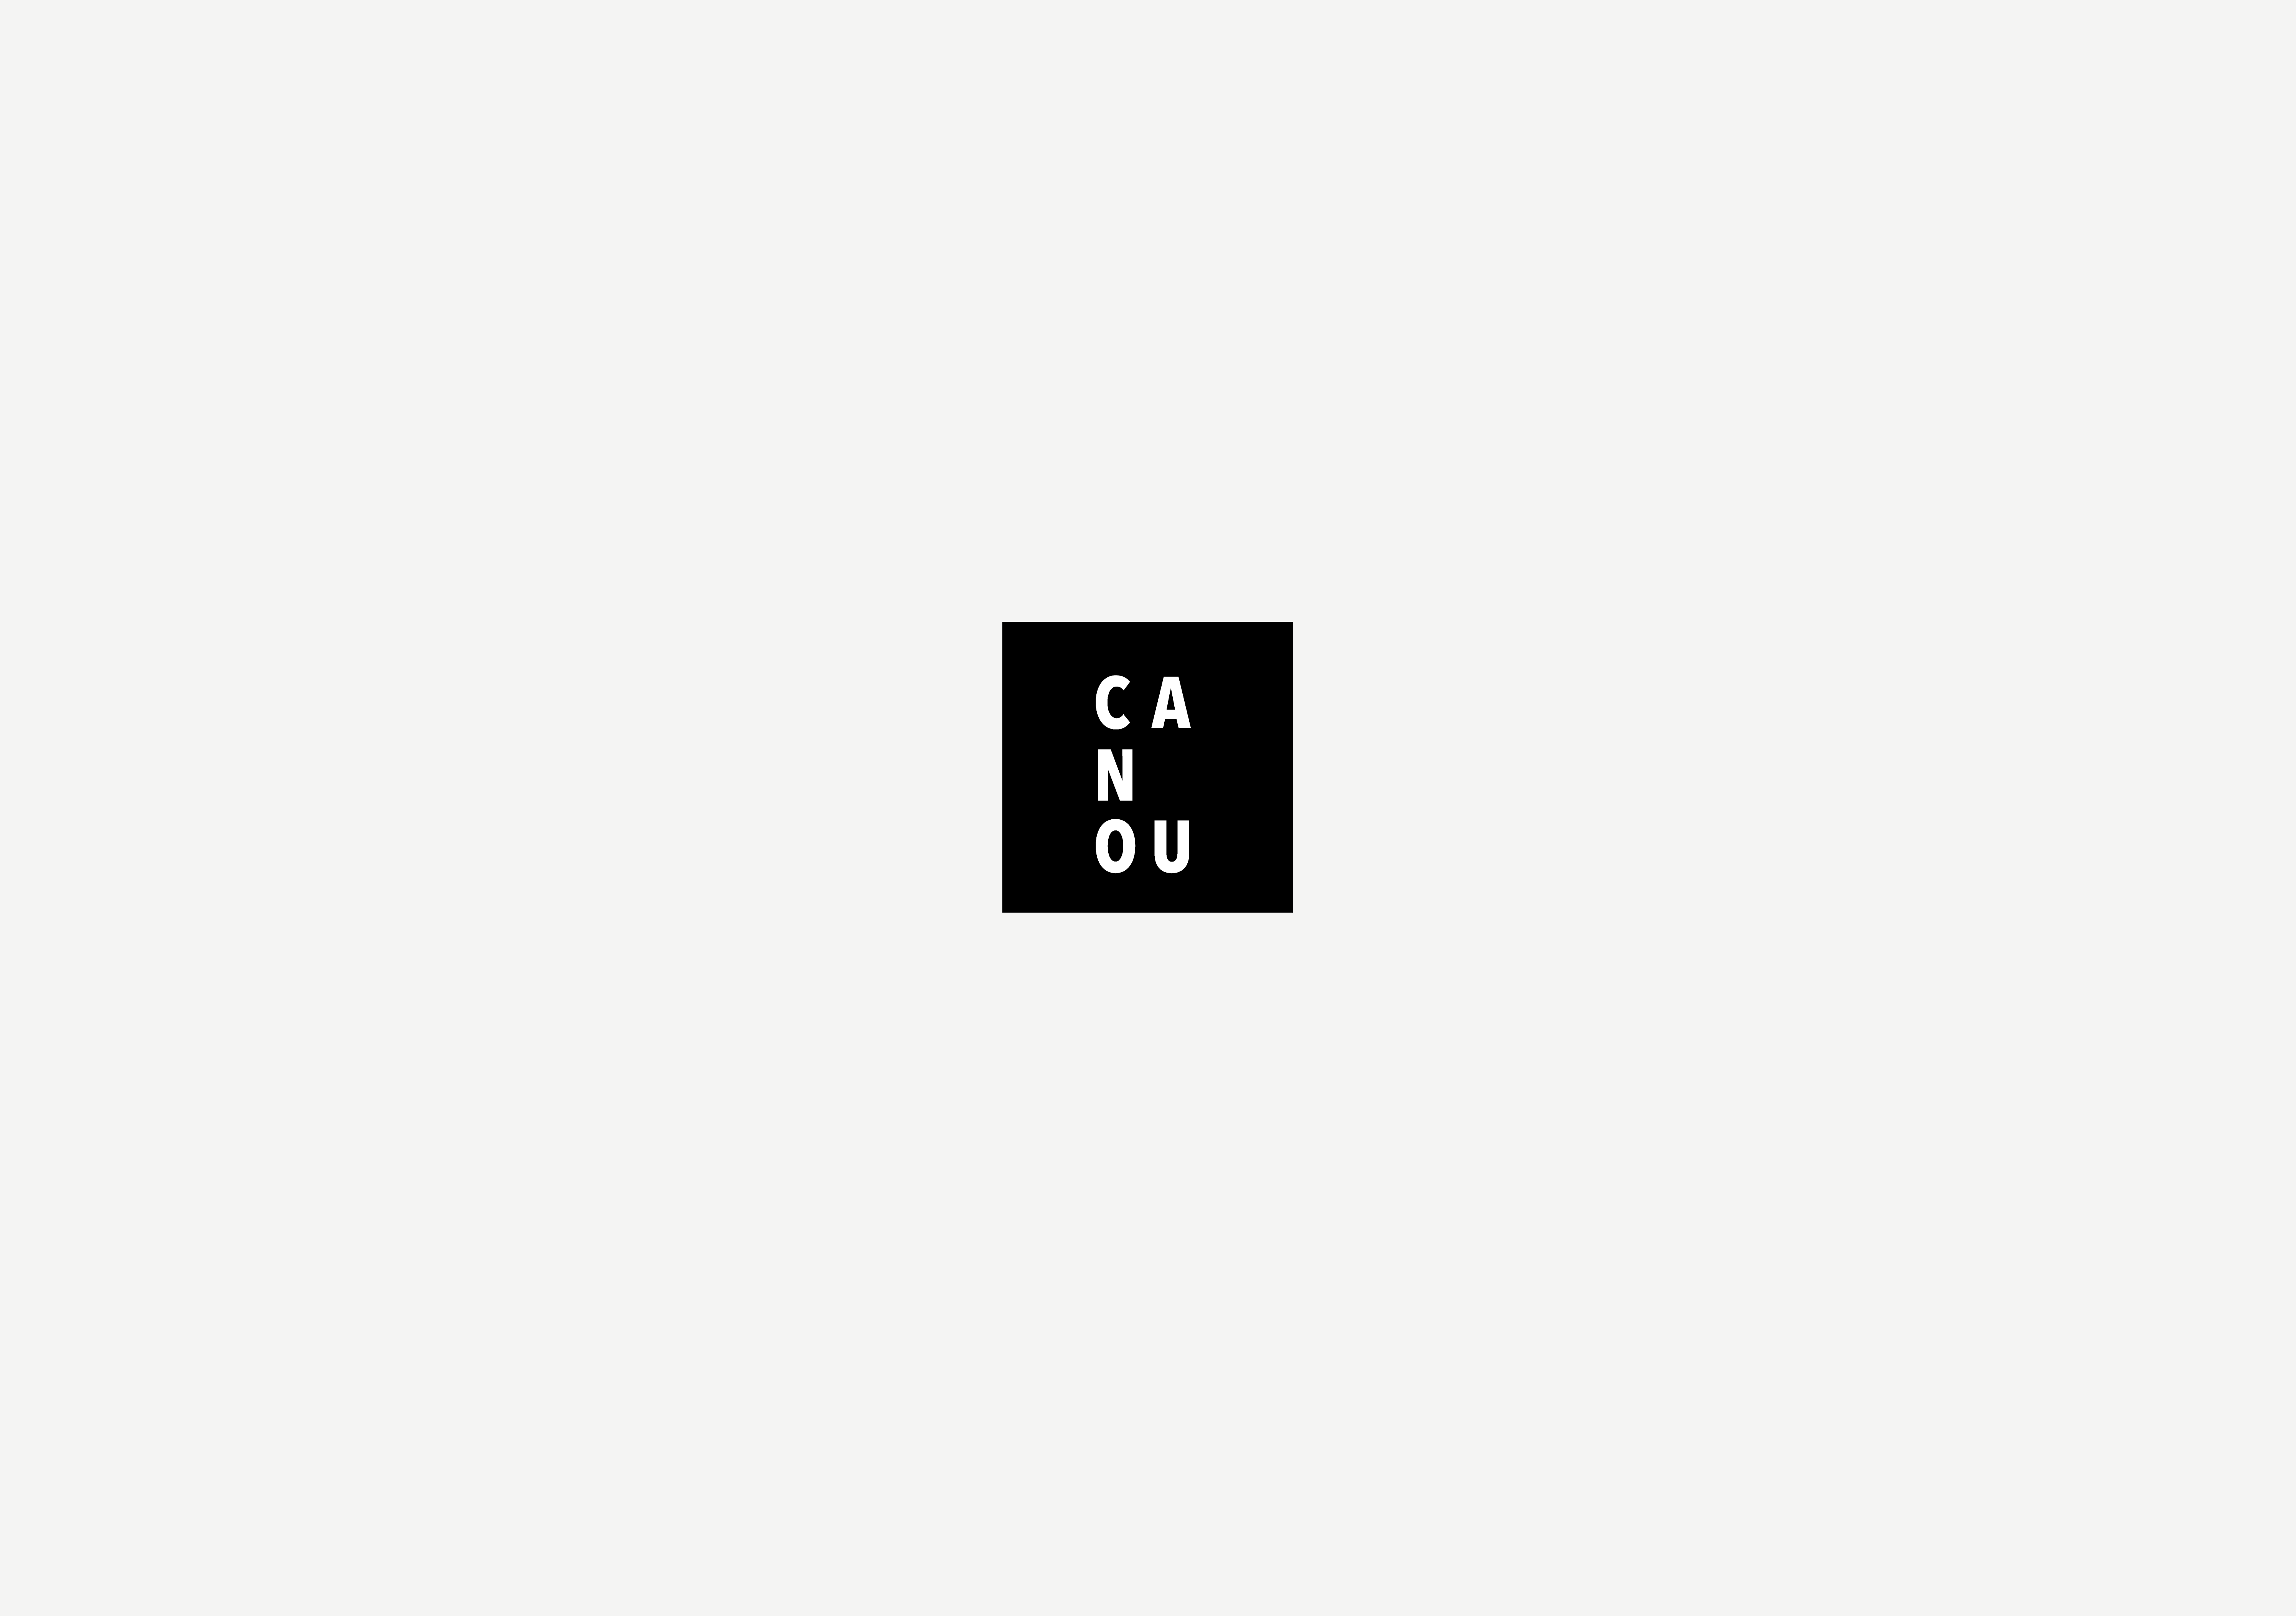 Branding for Canou, a Québec product manufacturer, by Ottawa Graphic Design Studio idApostle